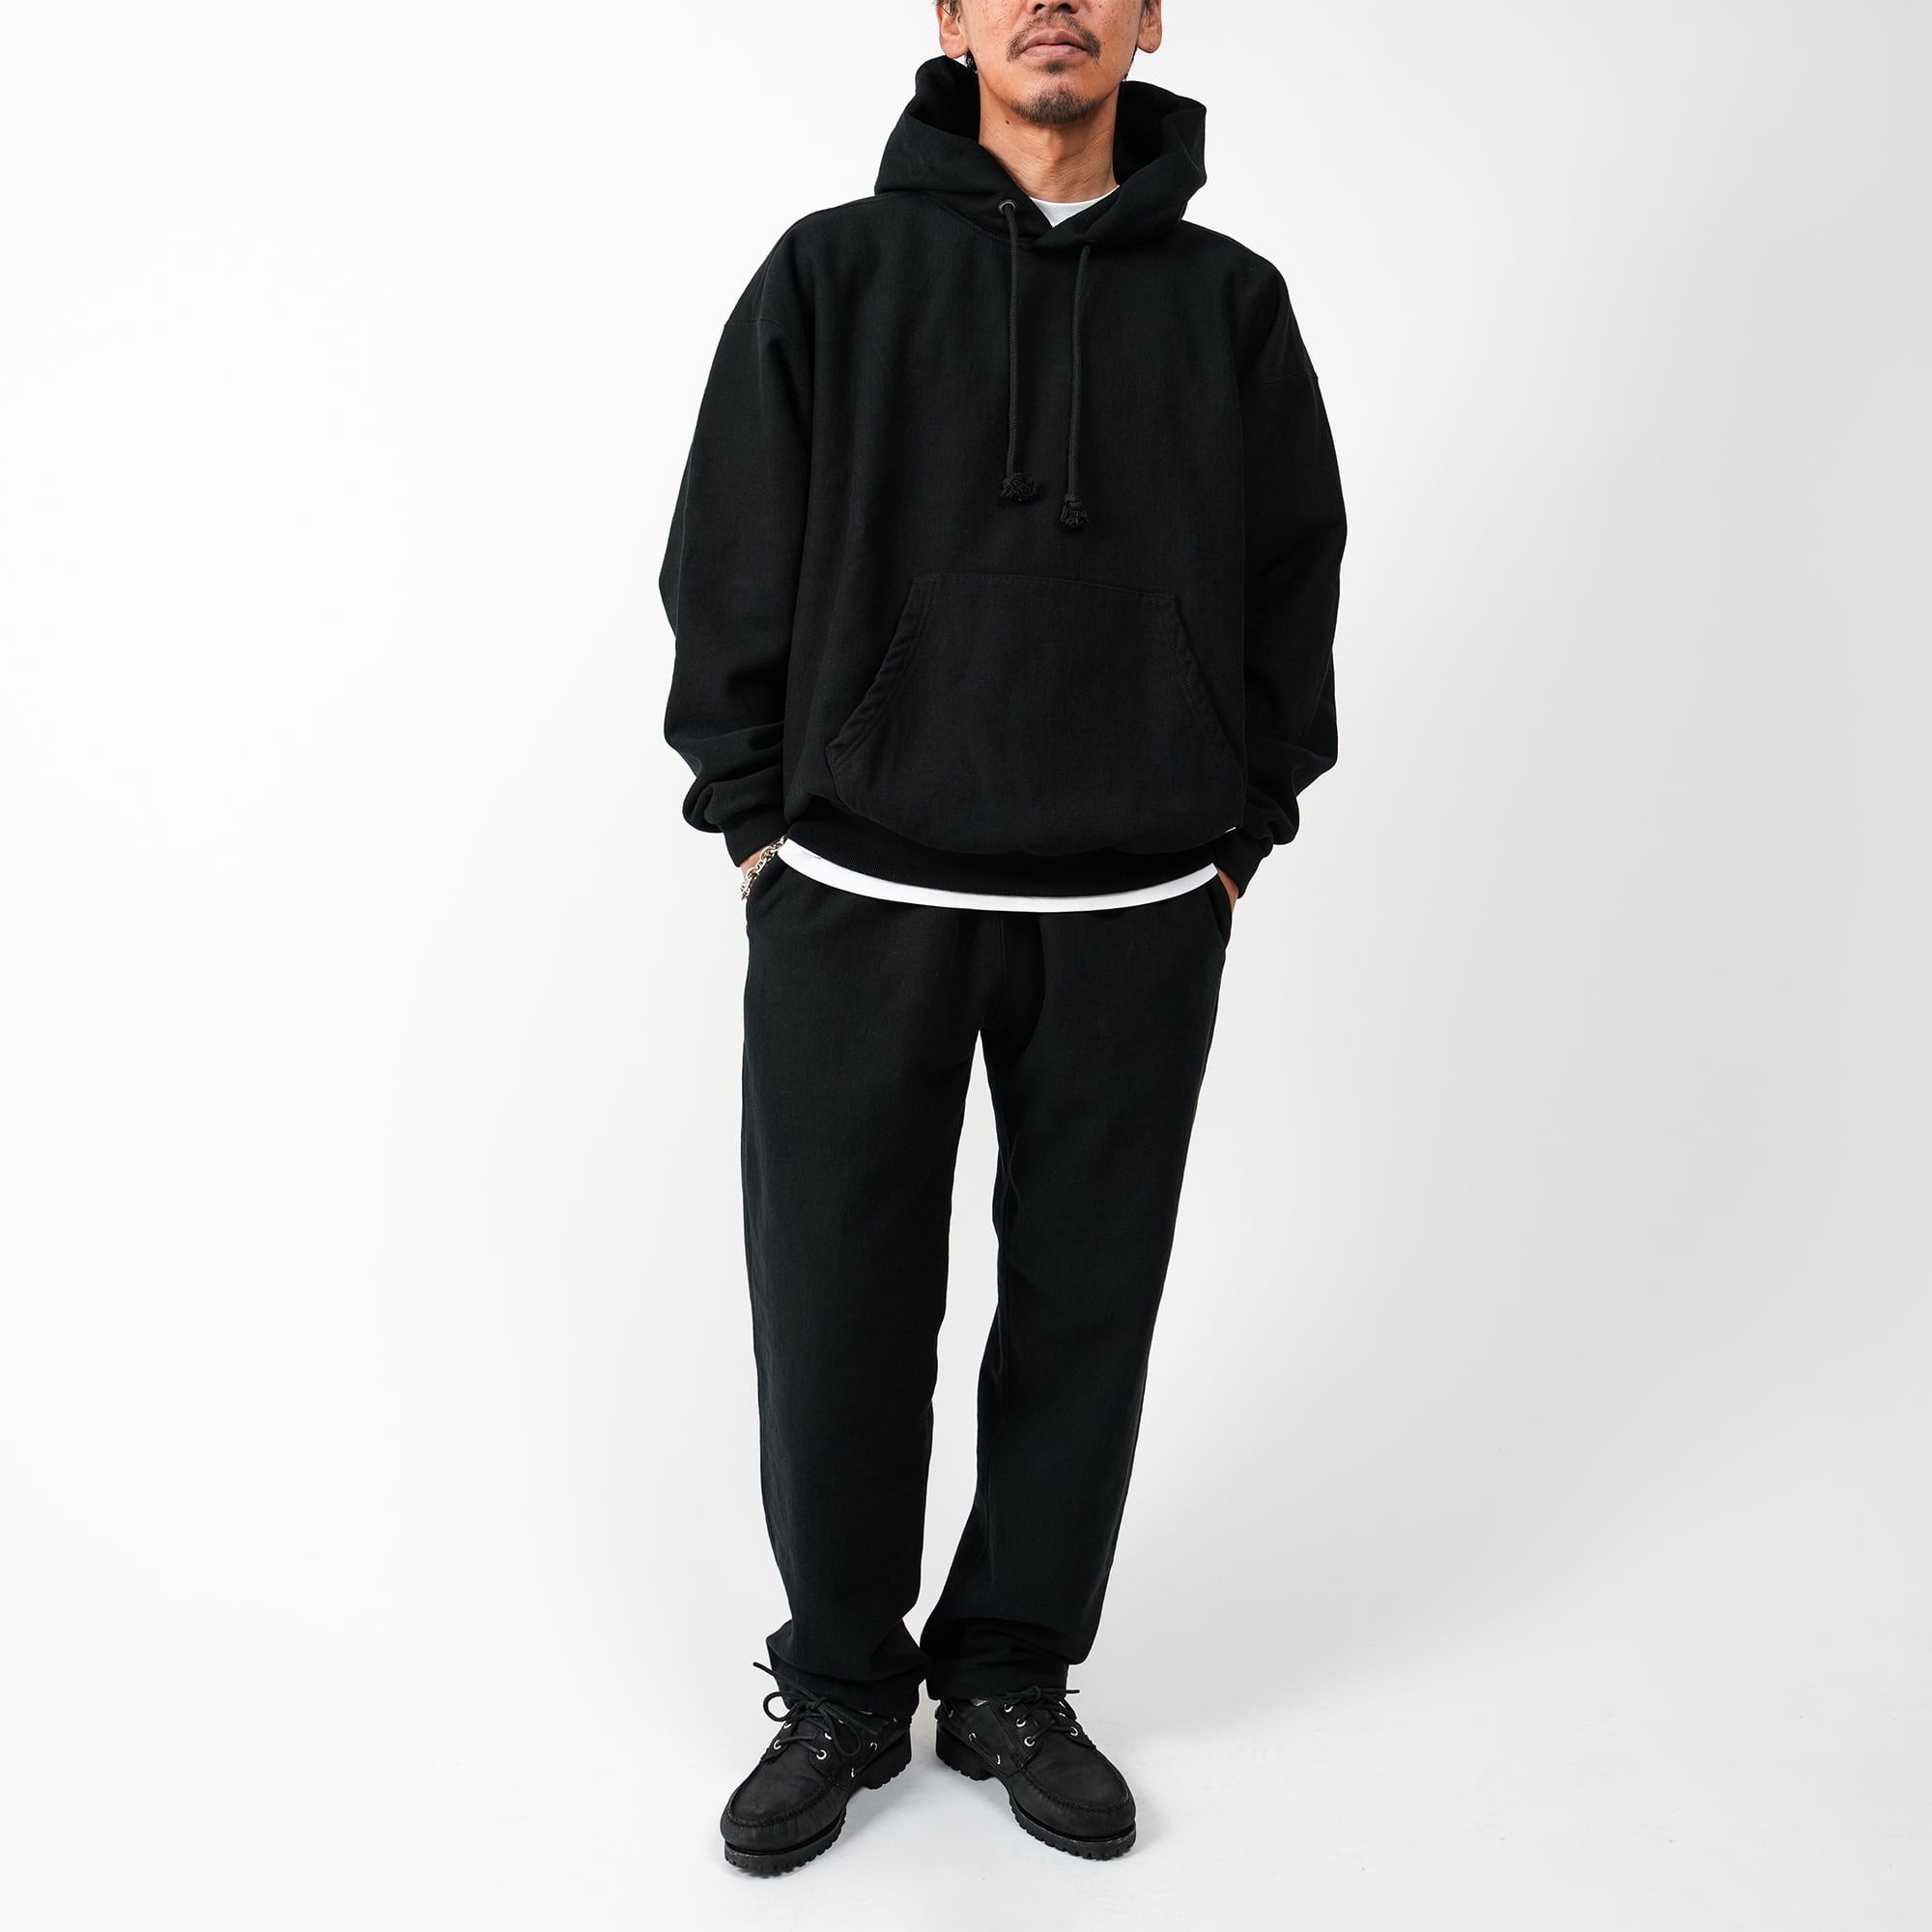 OVY Heavy Weight Wide Pullover Hoodie M購入を考えているんですが